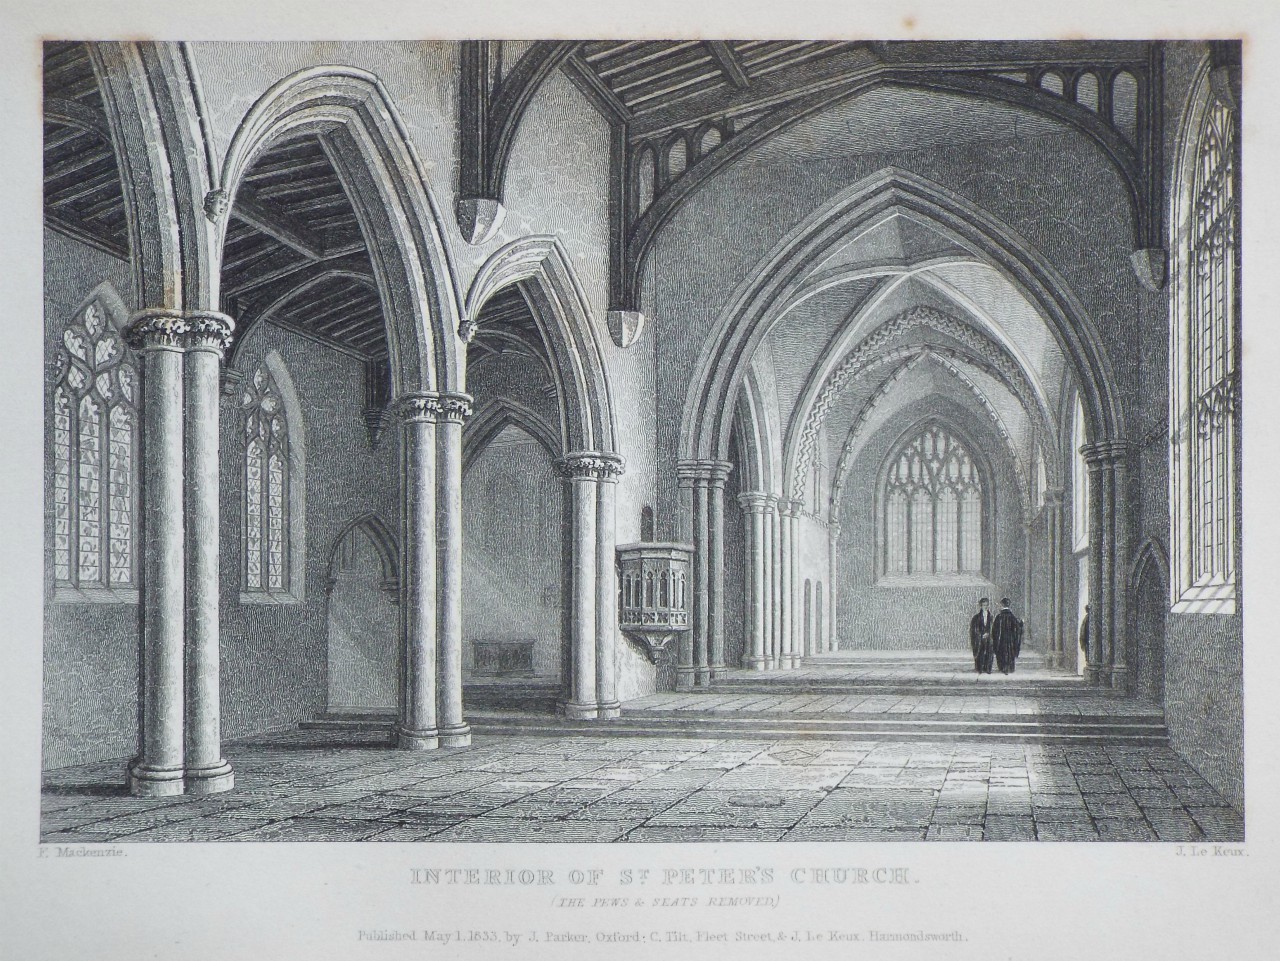 Print - Interior of St. Peter's Church. (The Pews & Seats Removed.) - Le